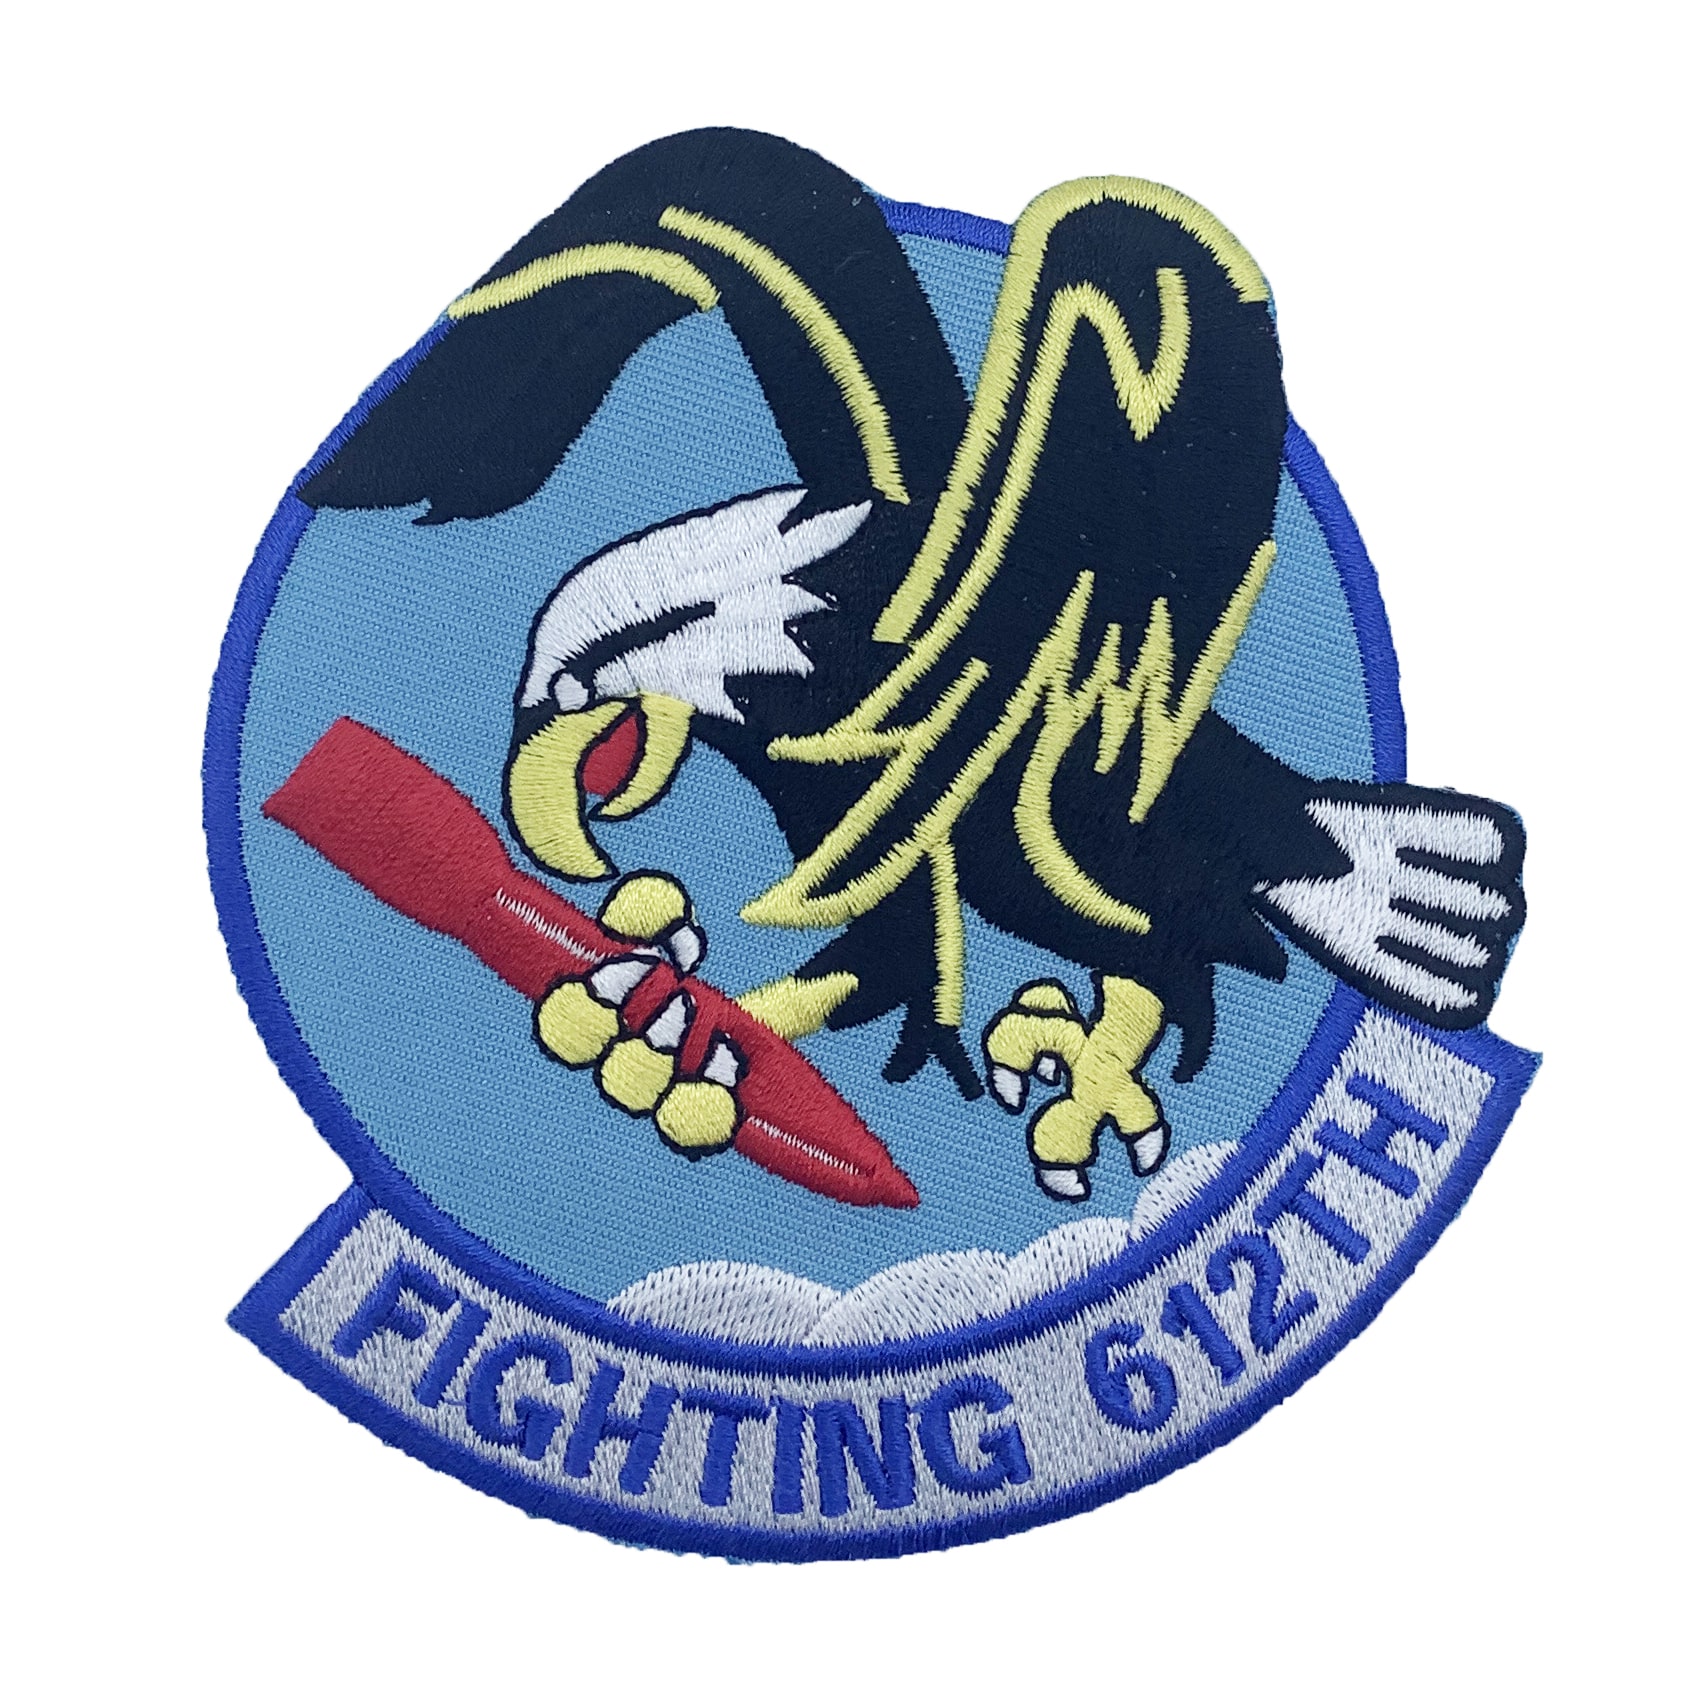 612th Tactical Fighter Squadron (1955) Patch - Sew On